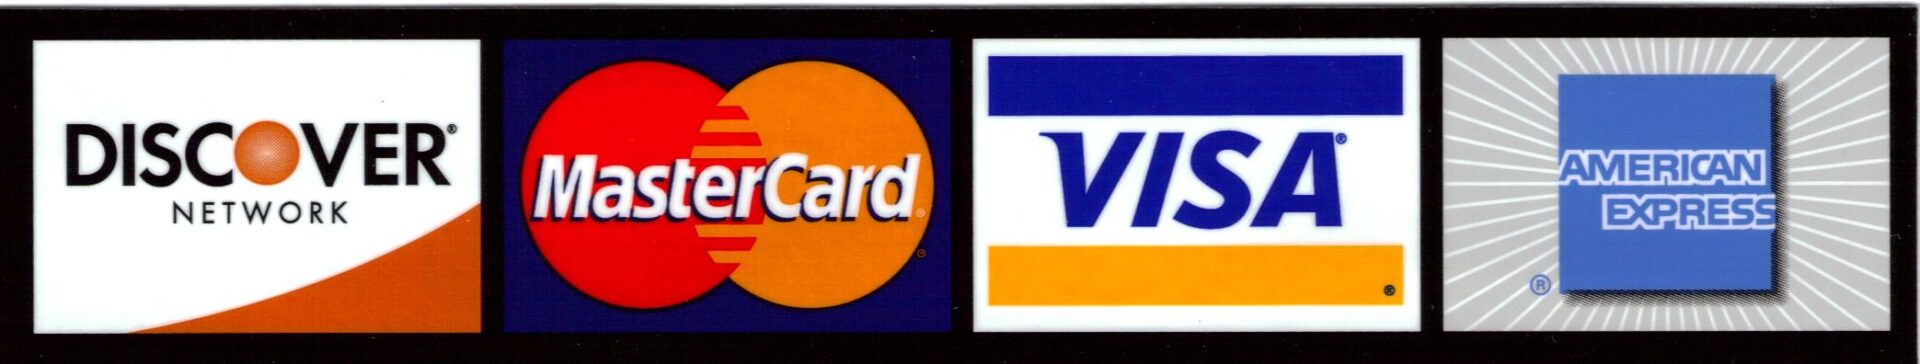 A close up of two logos for visa and mastercard